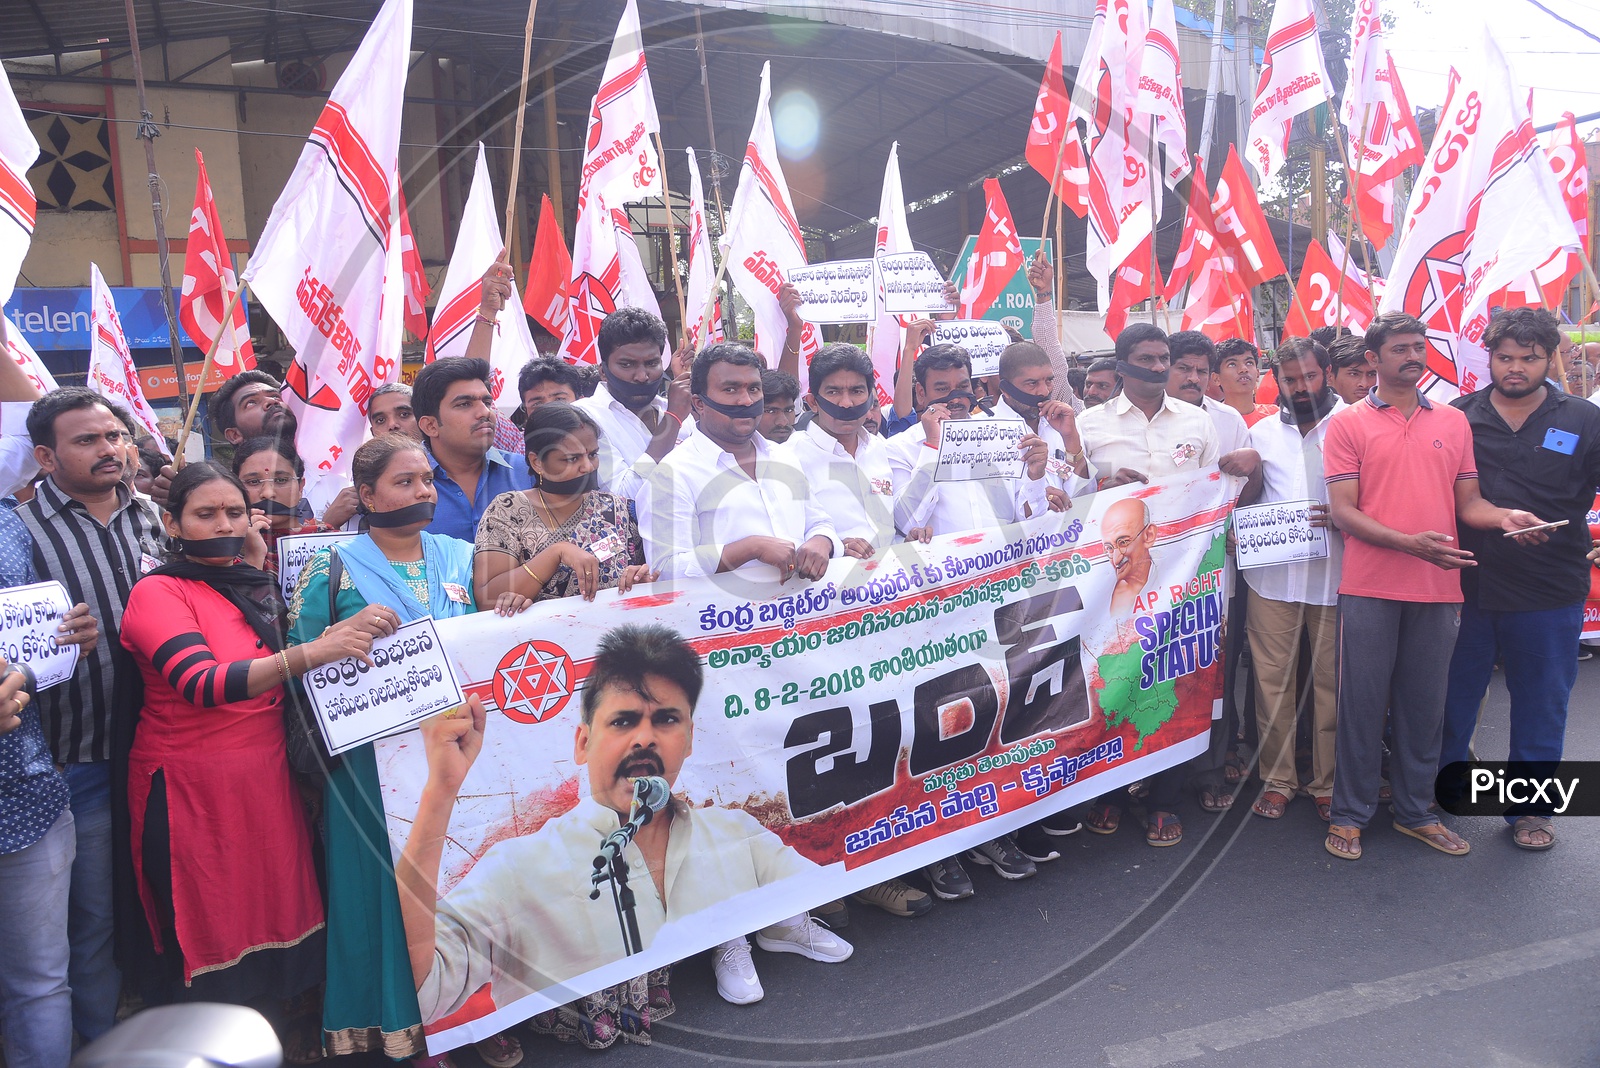 Andhra Pradesh People Protesting The Union Budget For Not  Allocating  AP Special Status  in Vijayawada